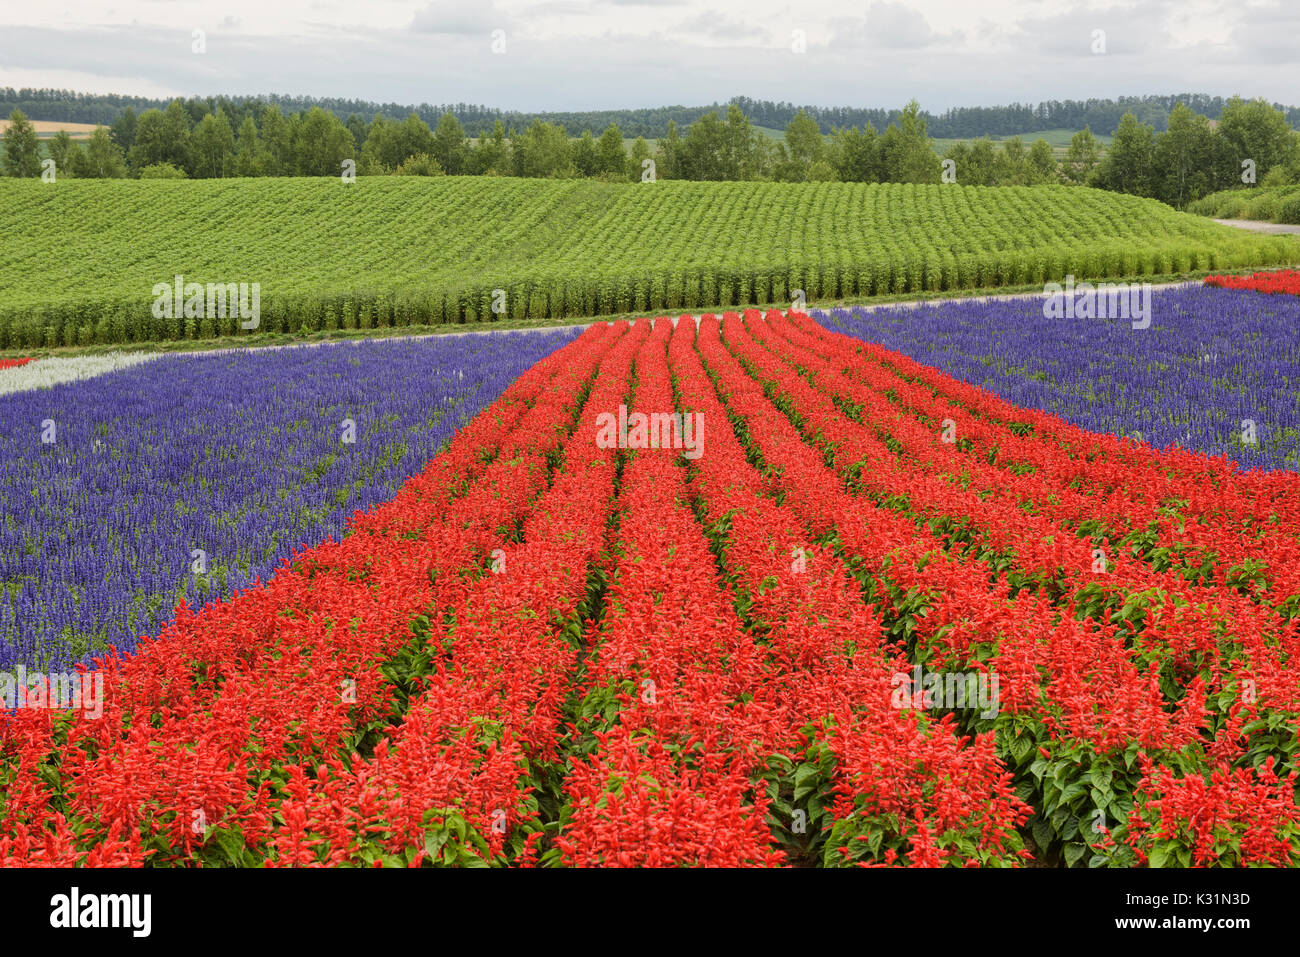 Colorful fields of scarlet sage and Lamiaceae at the flower fields of Shikisai no Oka, Hokkaido, Japan Stock Photo